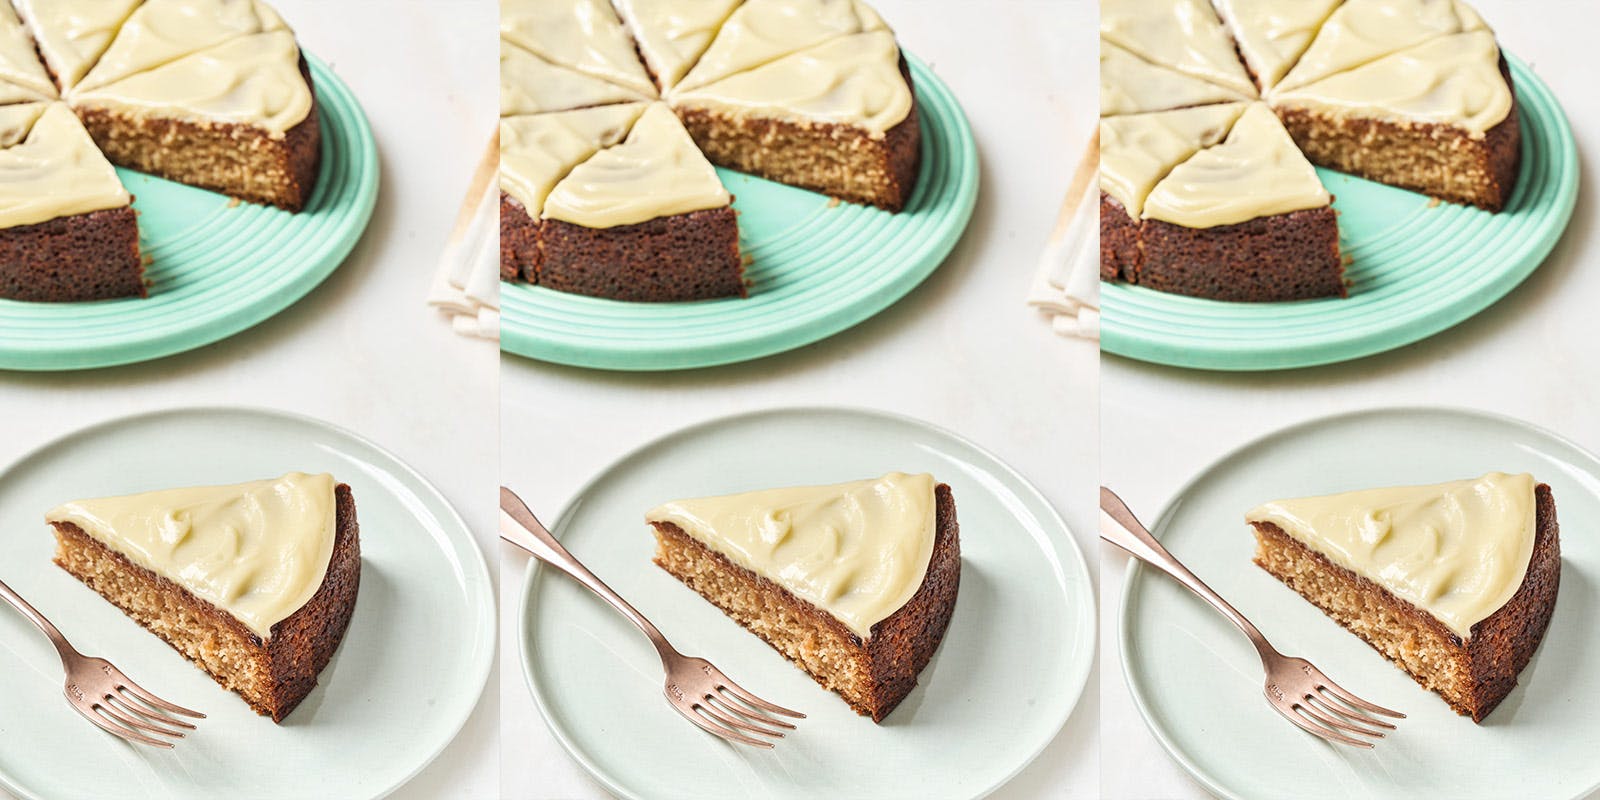 Apple and olive oil cake